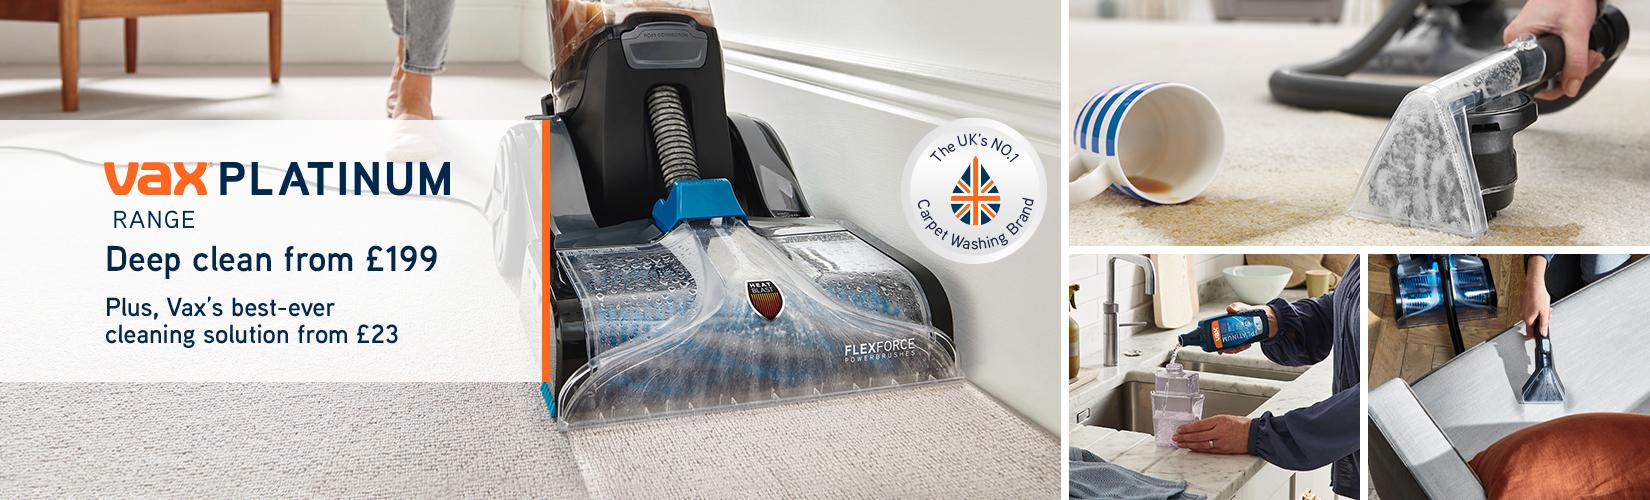 Vax platinum range. Deep clean from £199. Plus, Vax's best ever cleaning solution from £23.